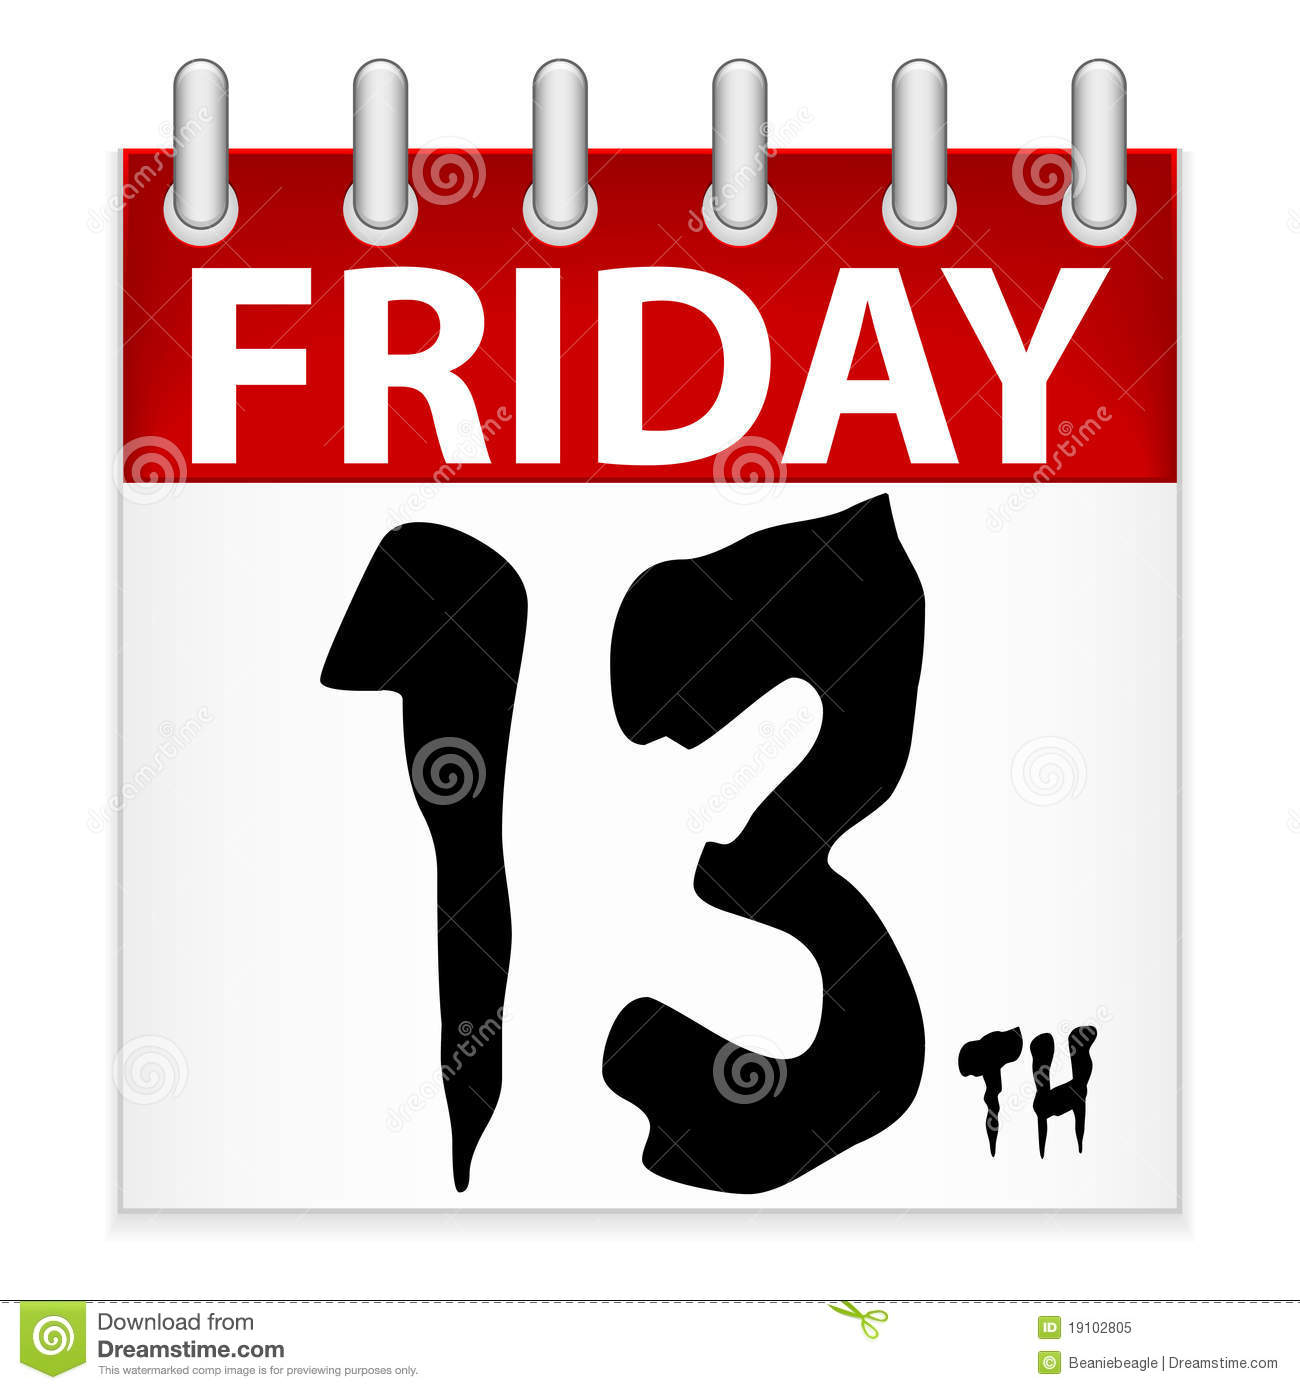 Stay Sane Friday 13th Is Upon Us Prima News